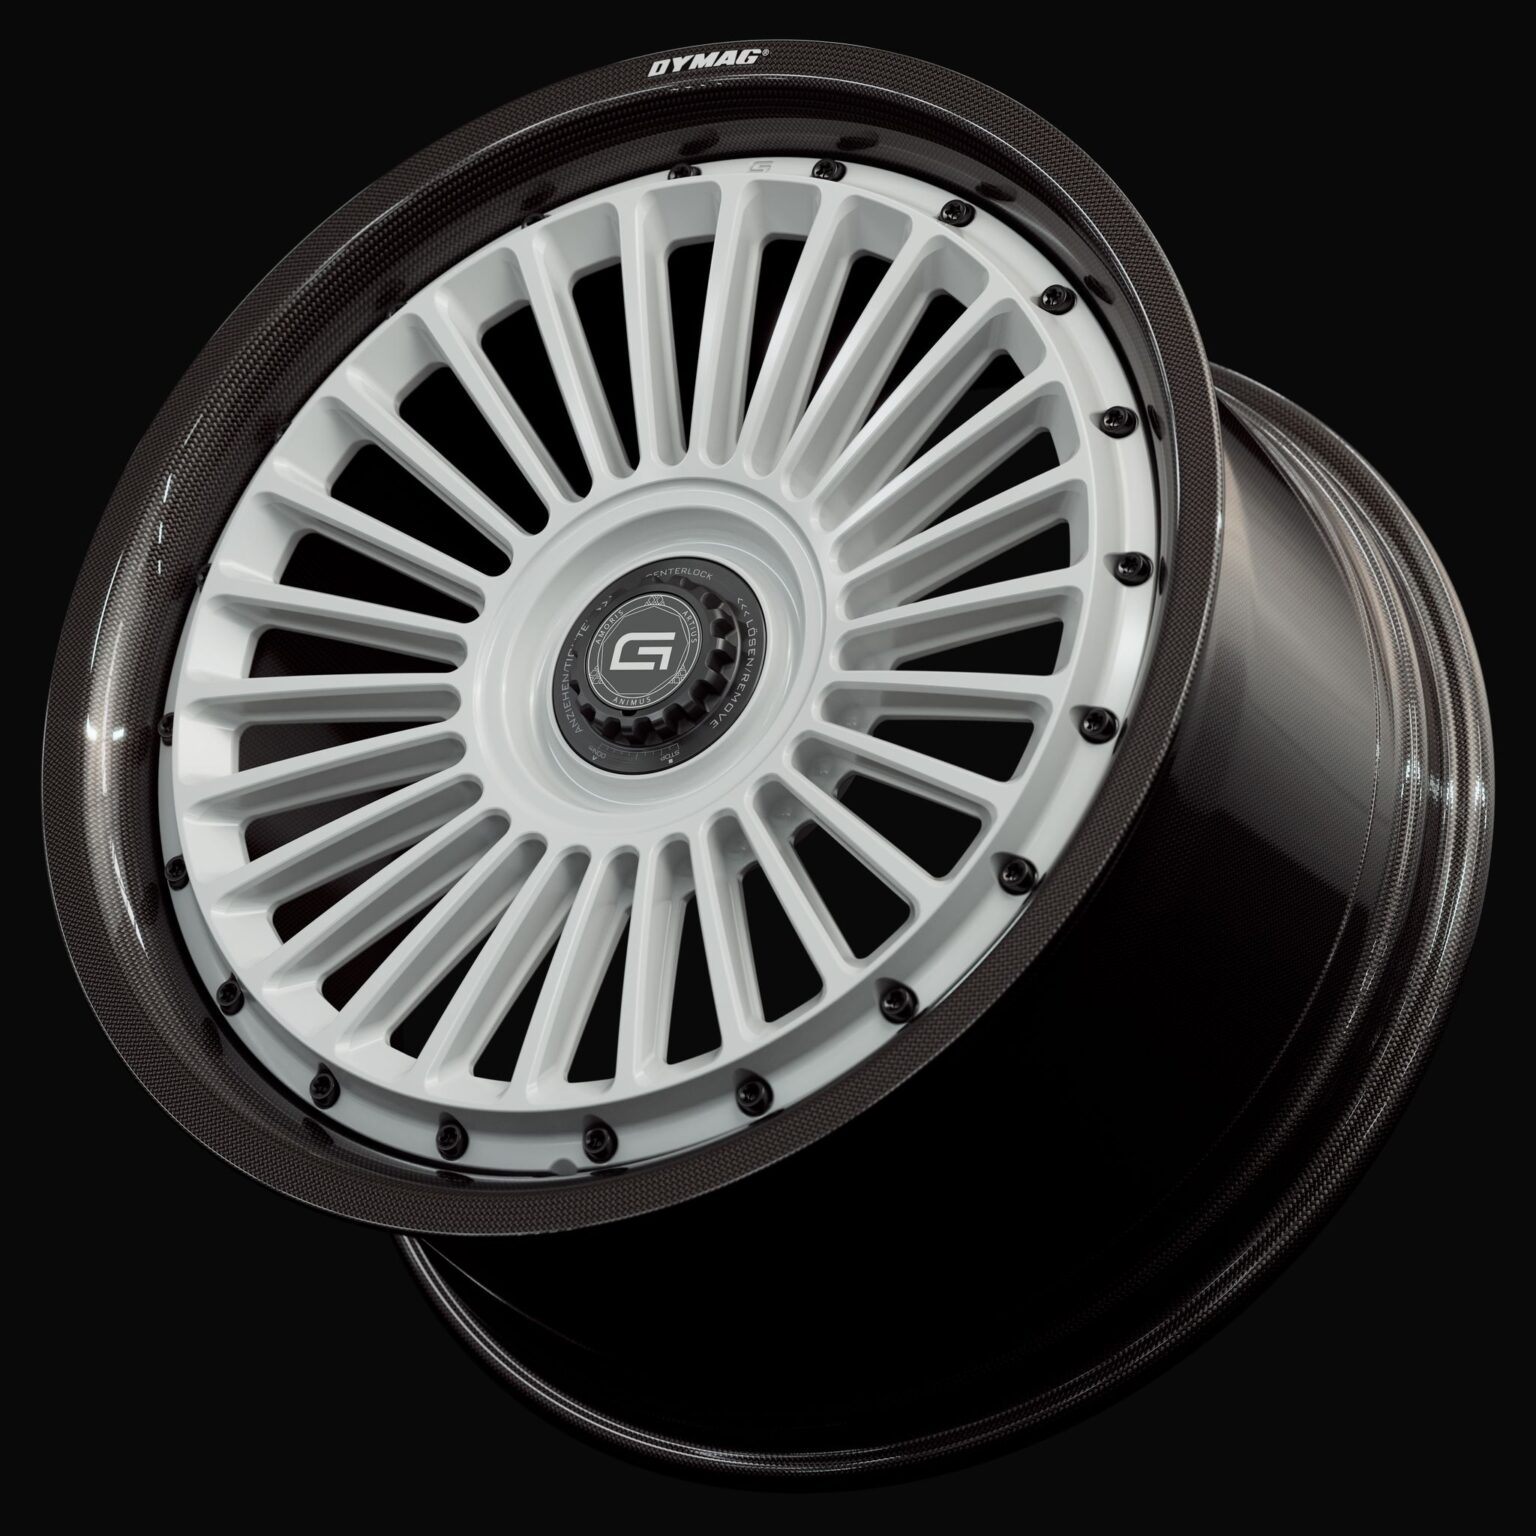 Three-quarter view of a white G26 2-piece centerlock wheel from Govad Forged Carbon8 series with carbon fiber lip